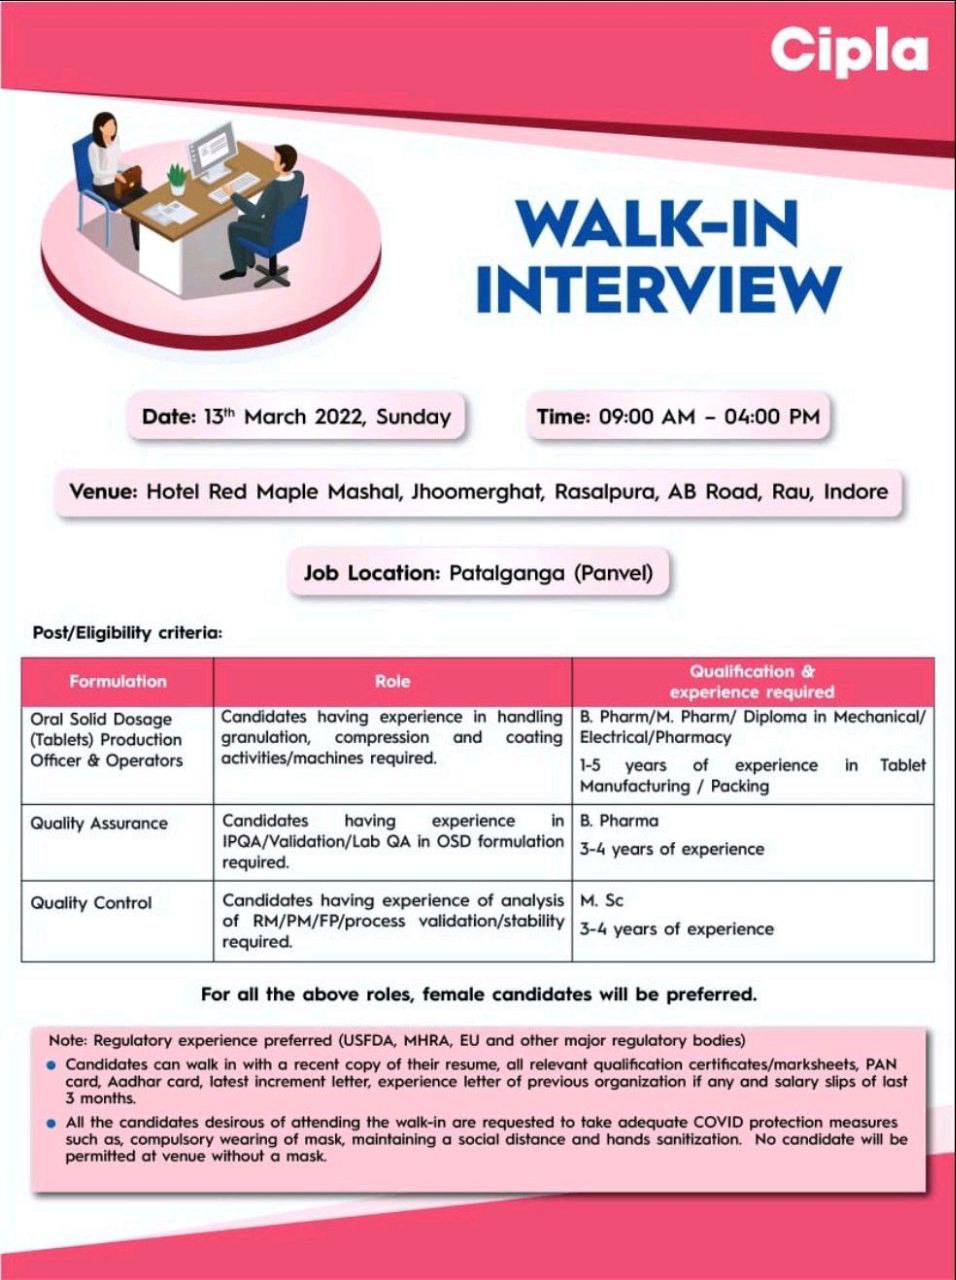 Job Availables,Cipla Limited Walk-In-Interview For B.Pharm/ M.Pharm/ MSc/ Diploma Mechanical/ Electrical/ Pharmacy